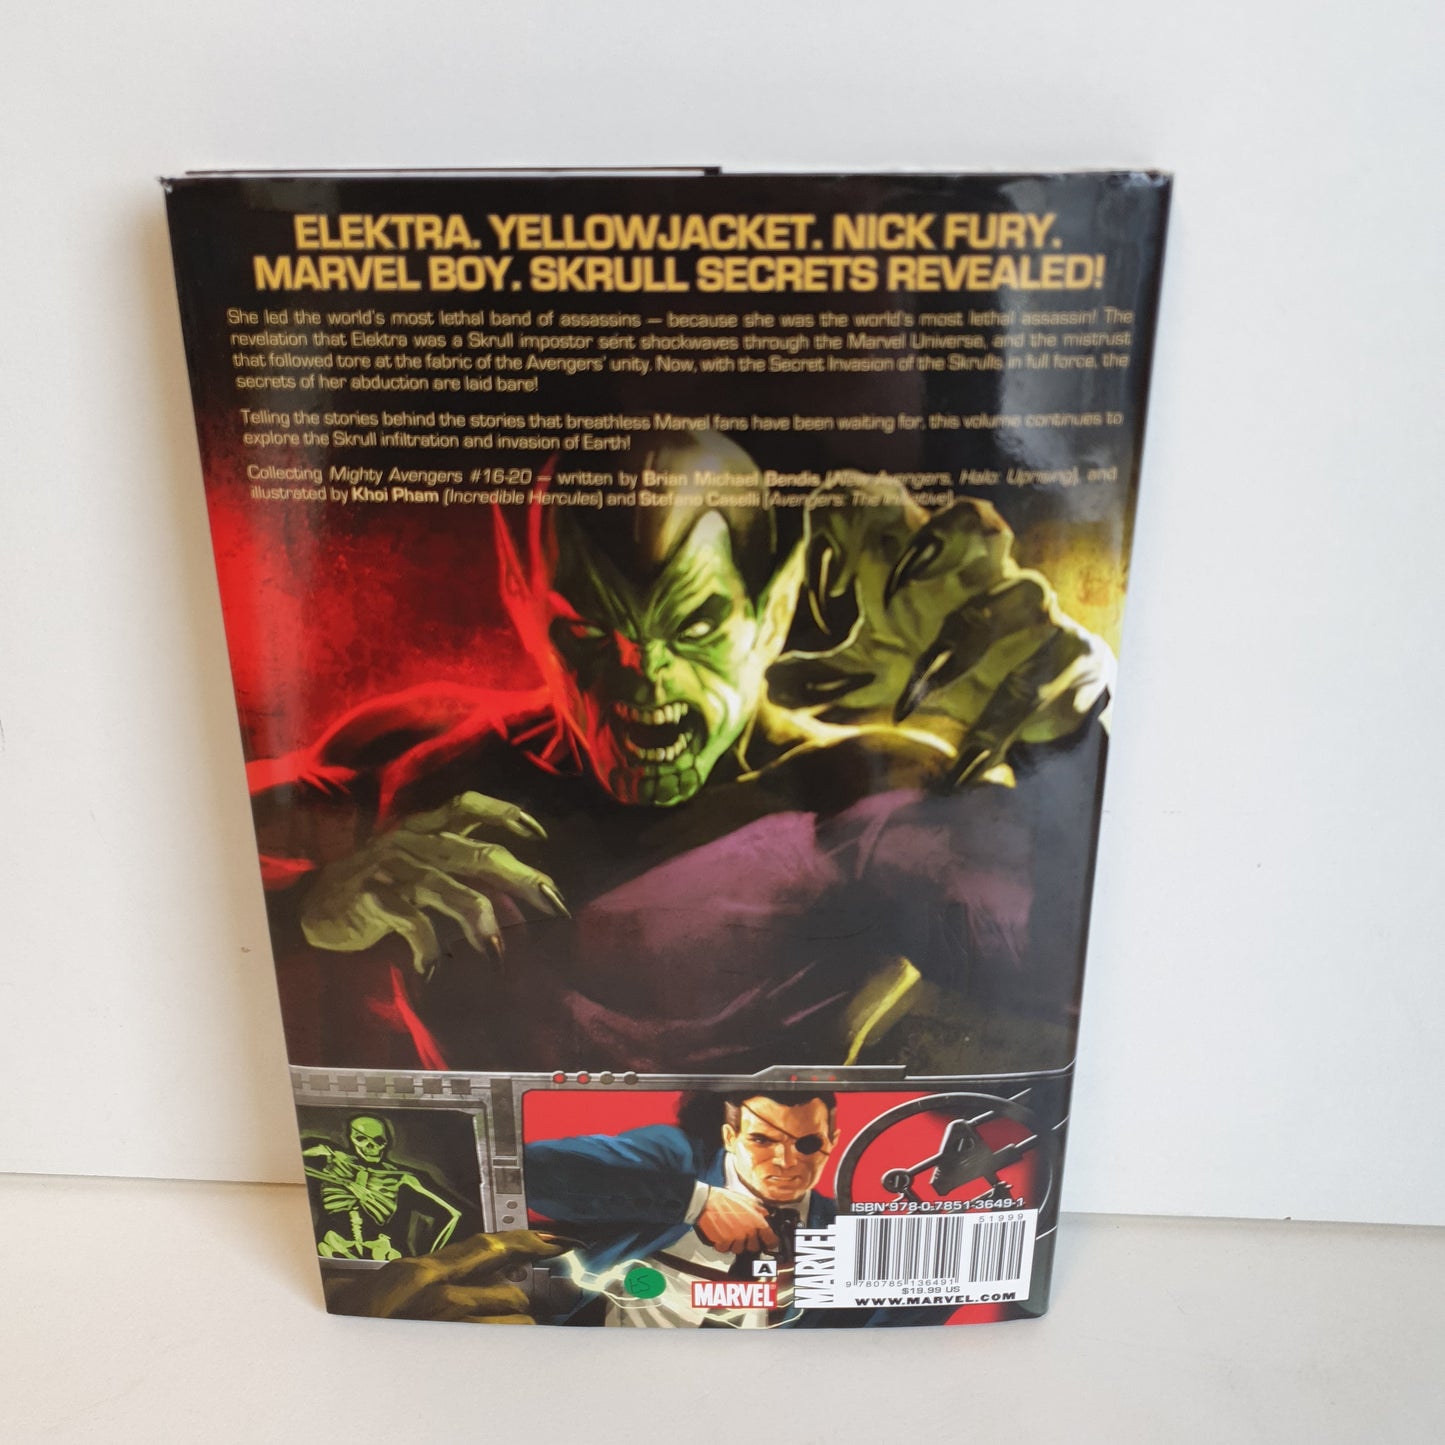 The Mighty Avengers Secret Invasion by Bendis, Pham & Caselli (2009)